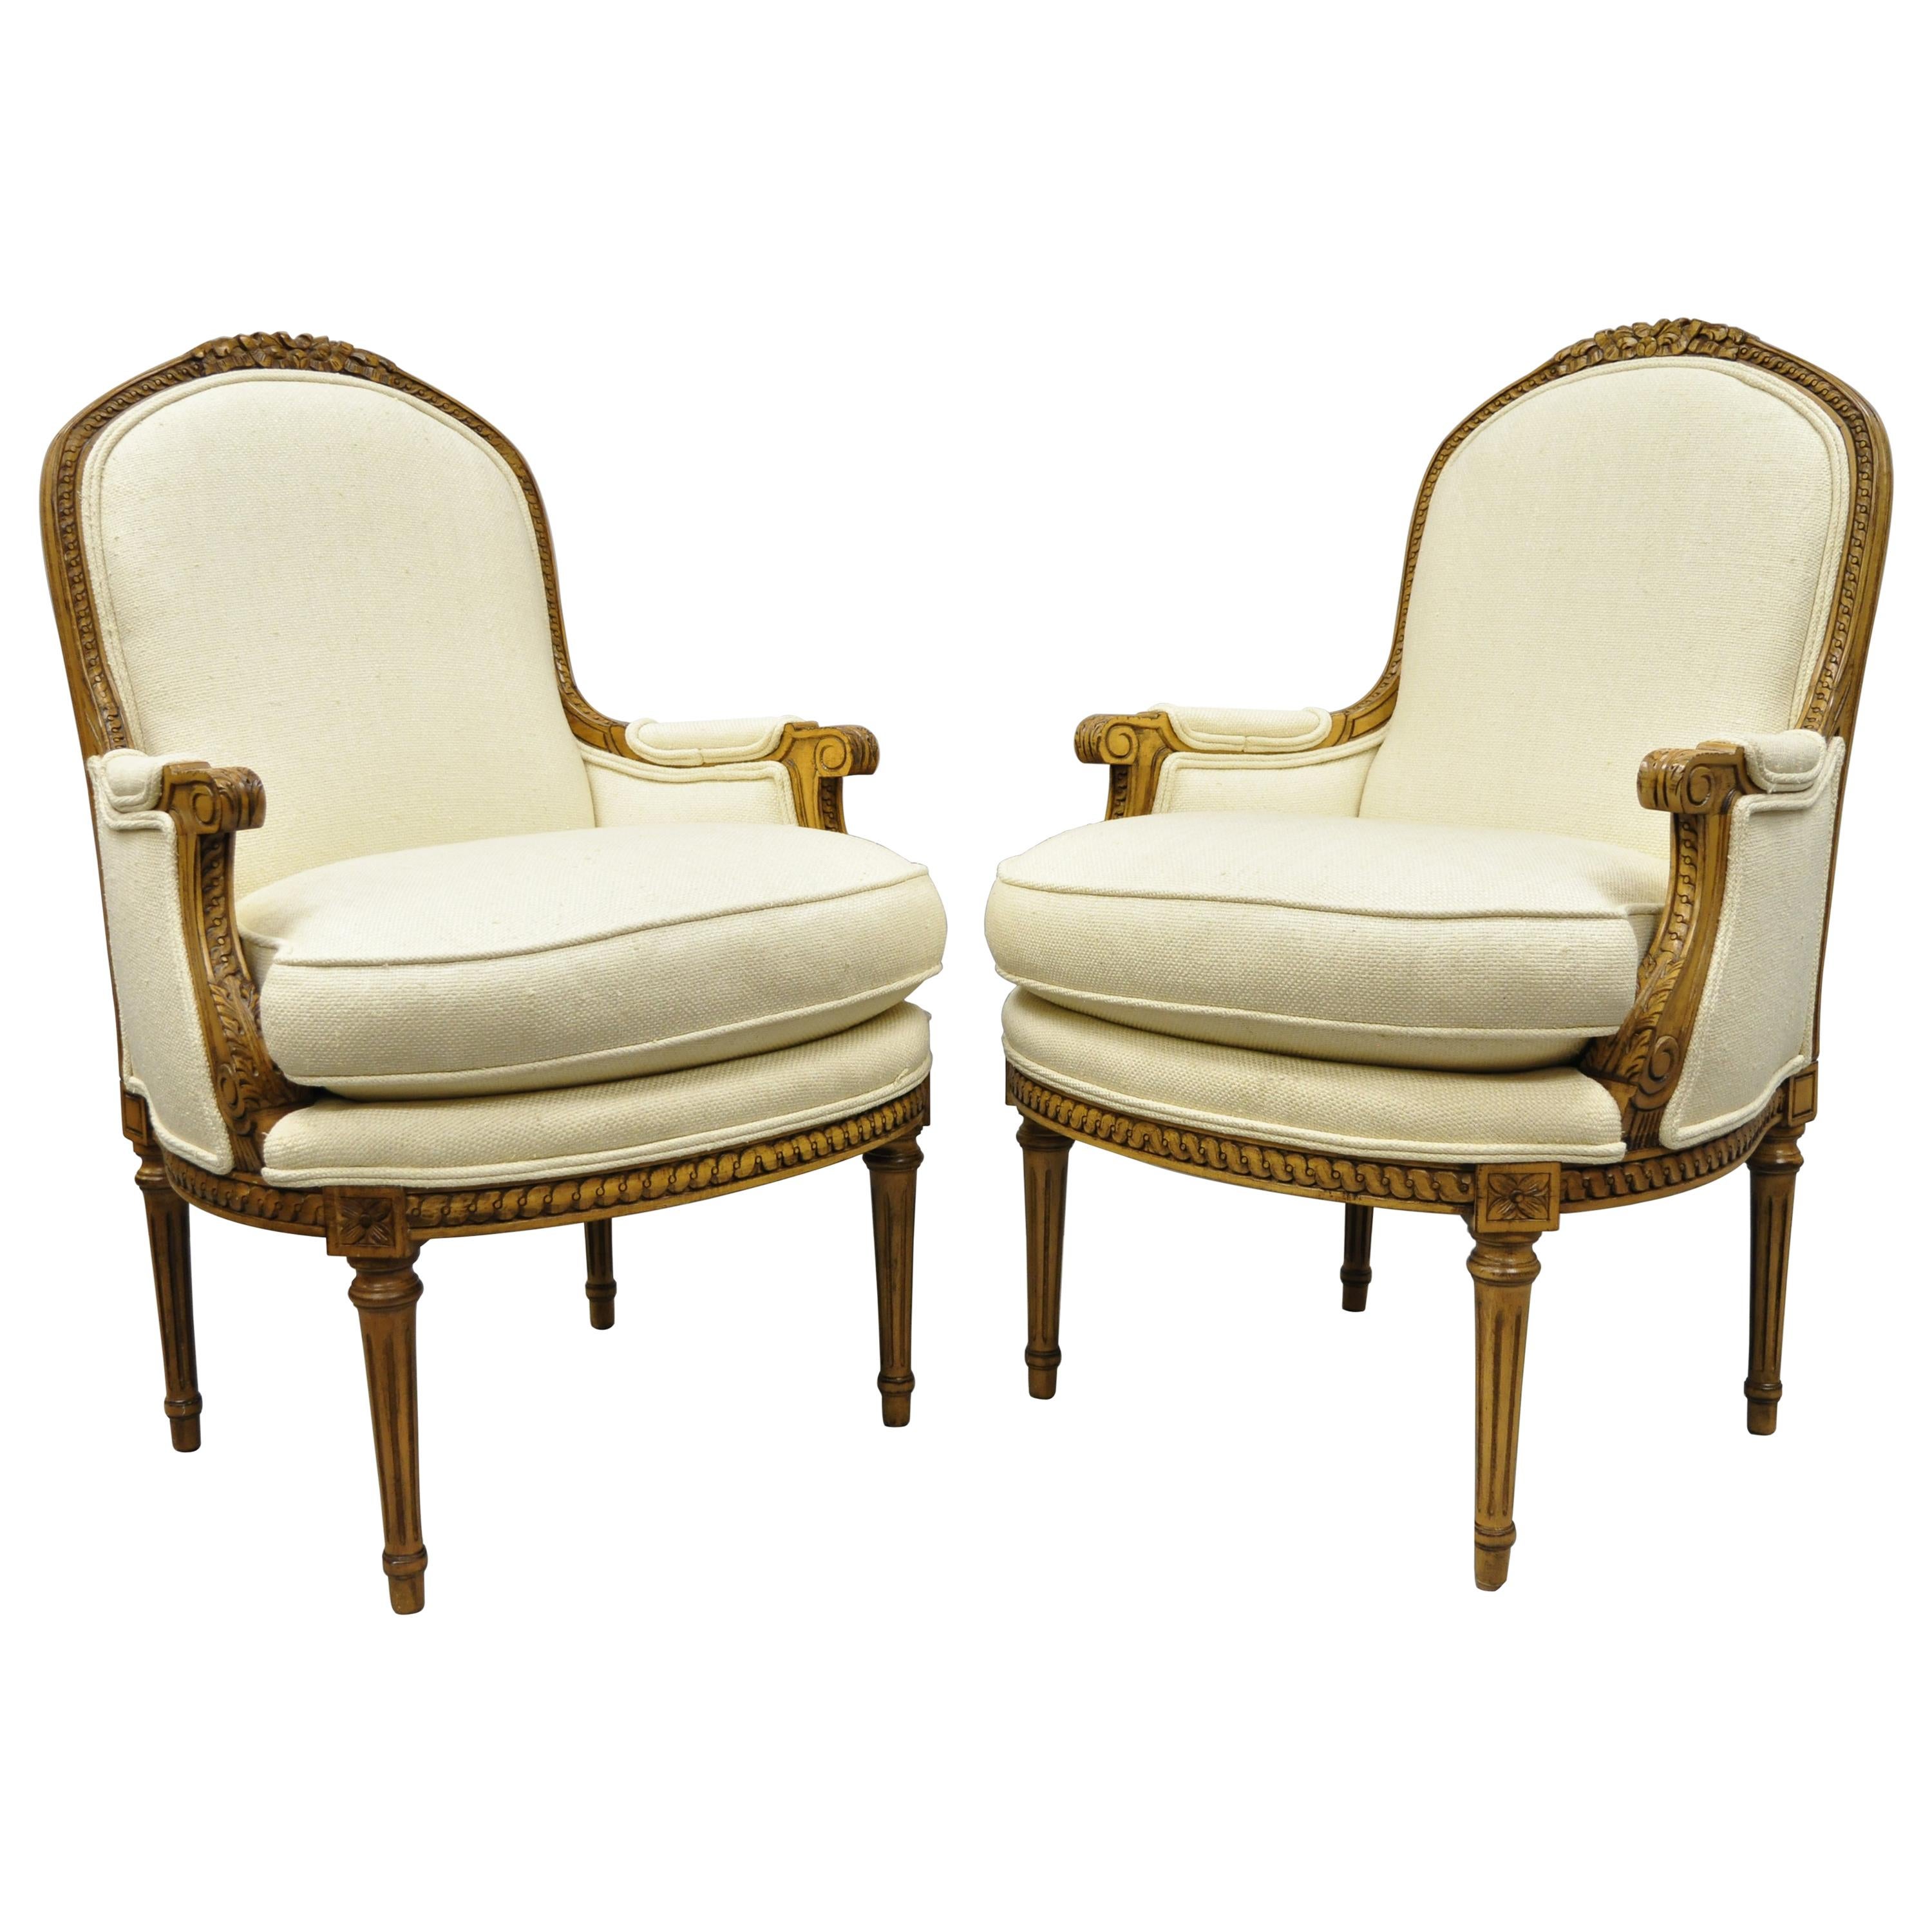 Pair of French Louis XVI Style Upholstered Bergere Armchairs Greenbaum Interiors